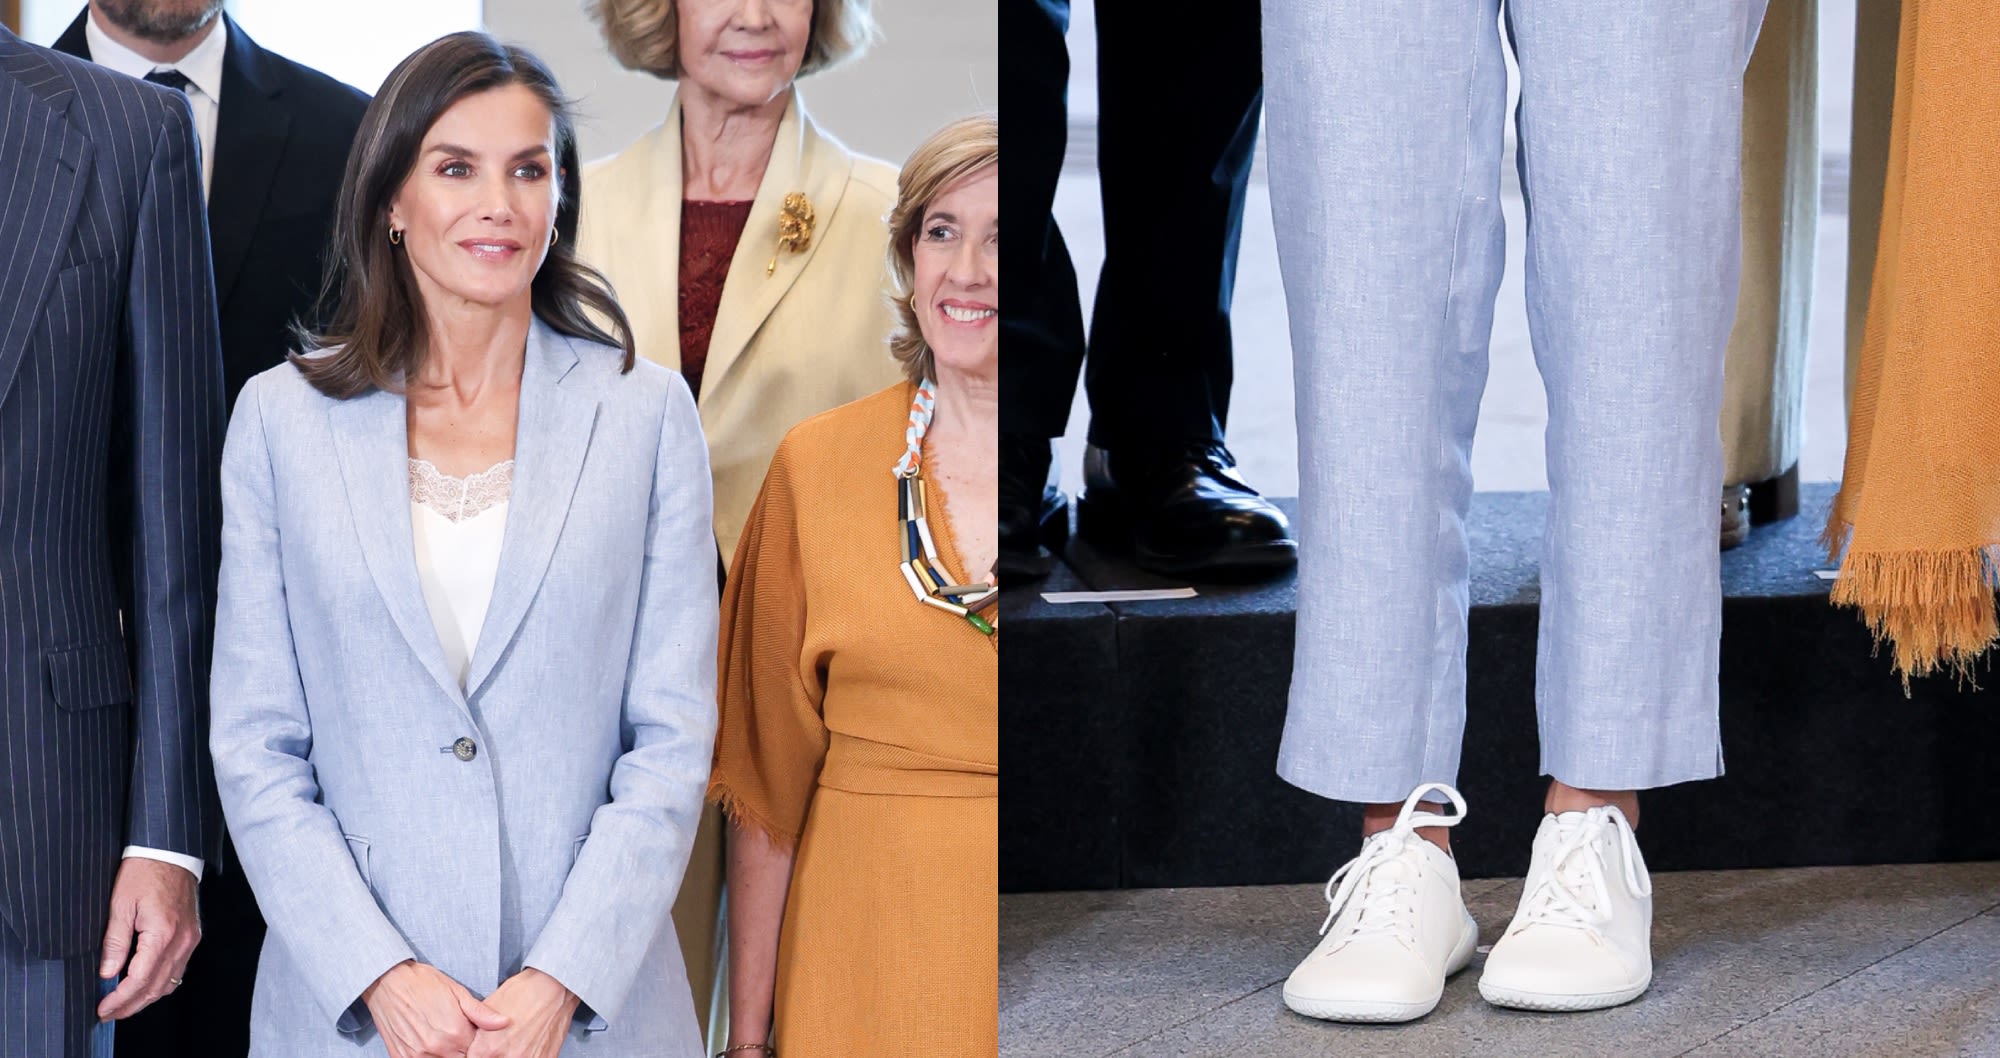 Queen Letizia Gives Power Suit a Sporty Twist With White Sneakers at the Gallery of The Royal Collections in Spain